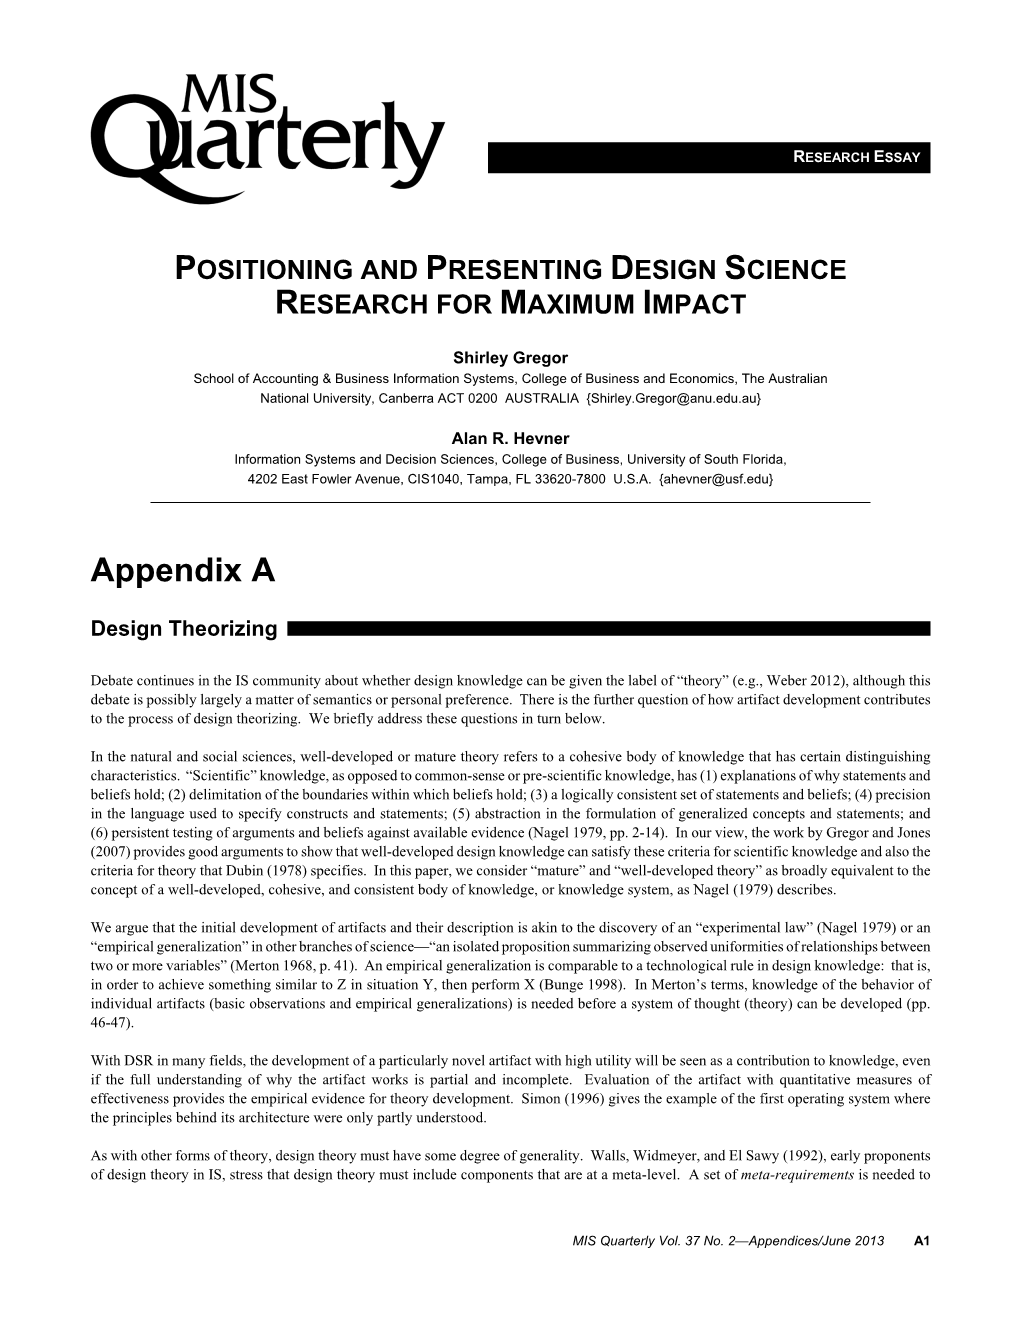 Positioning and Presenting Design Science Research for Maximum Impact